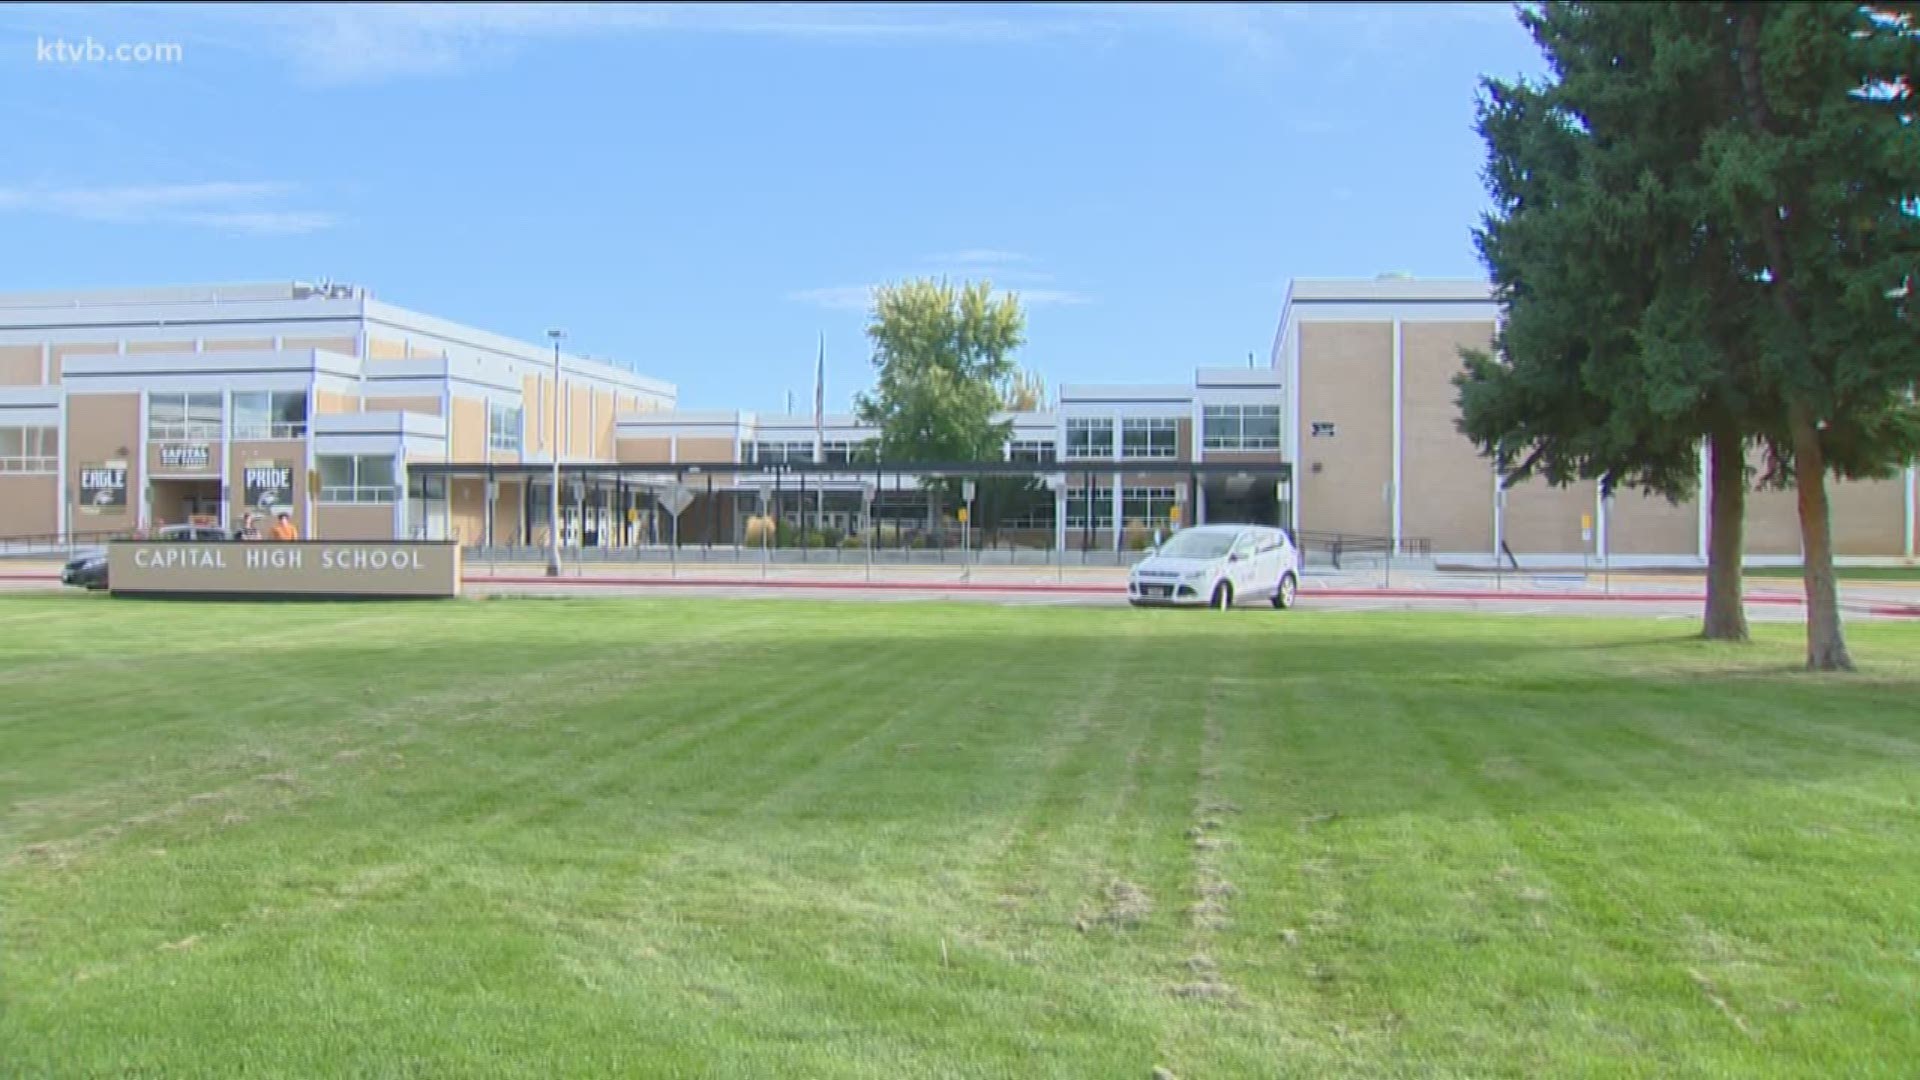 Health officials are working with the school to notify anyone who may have been exposed to the disease.